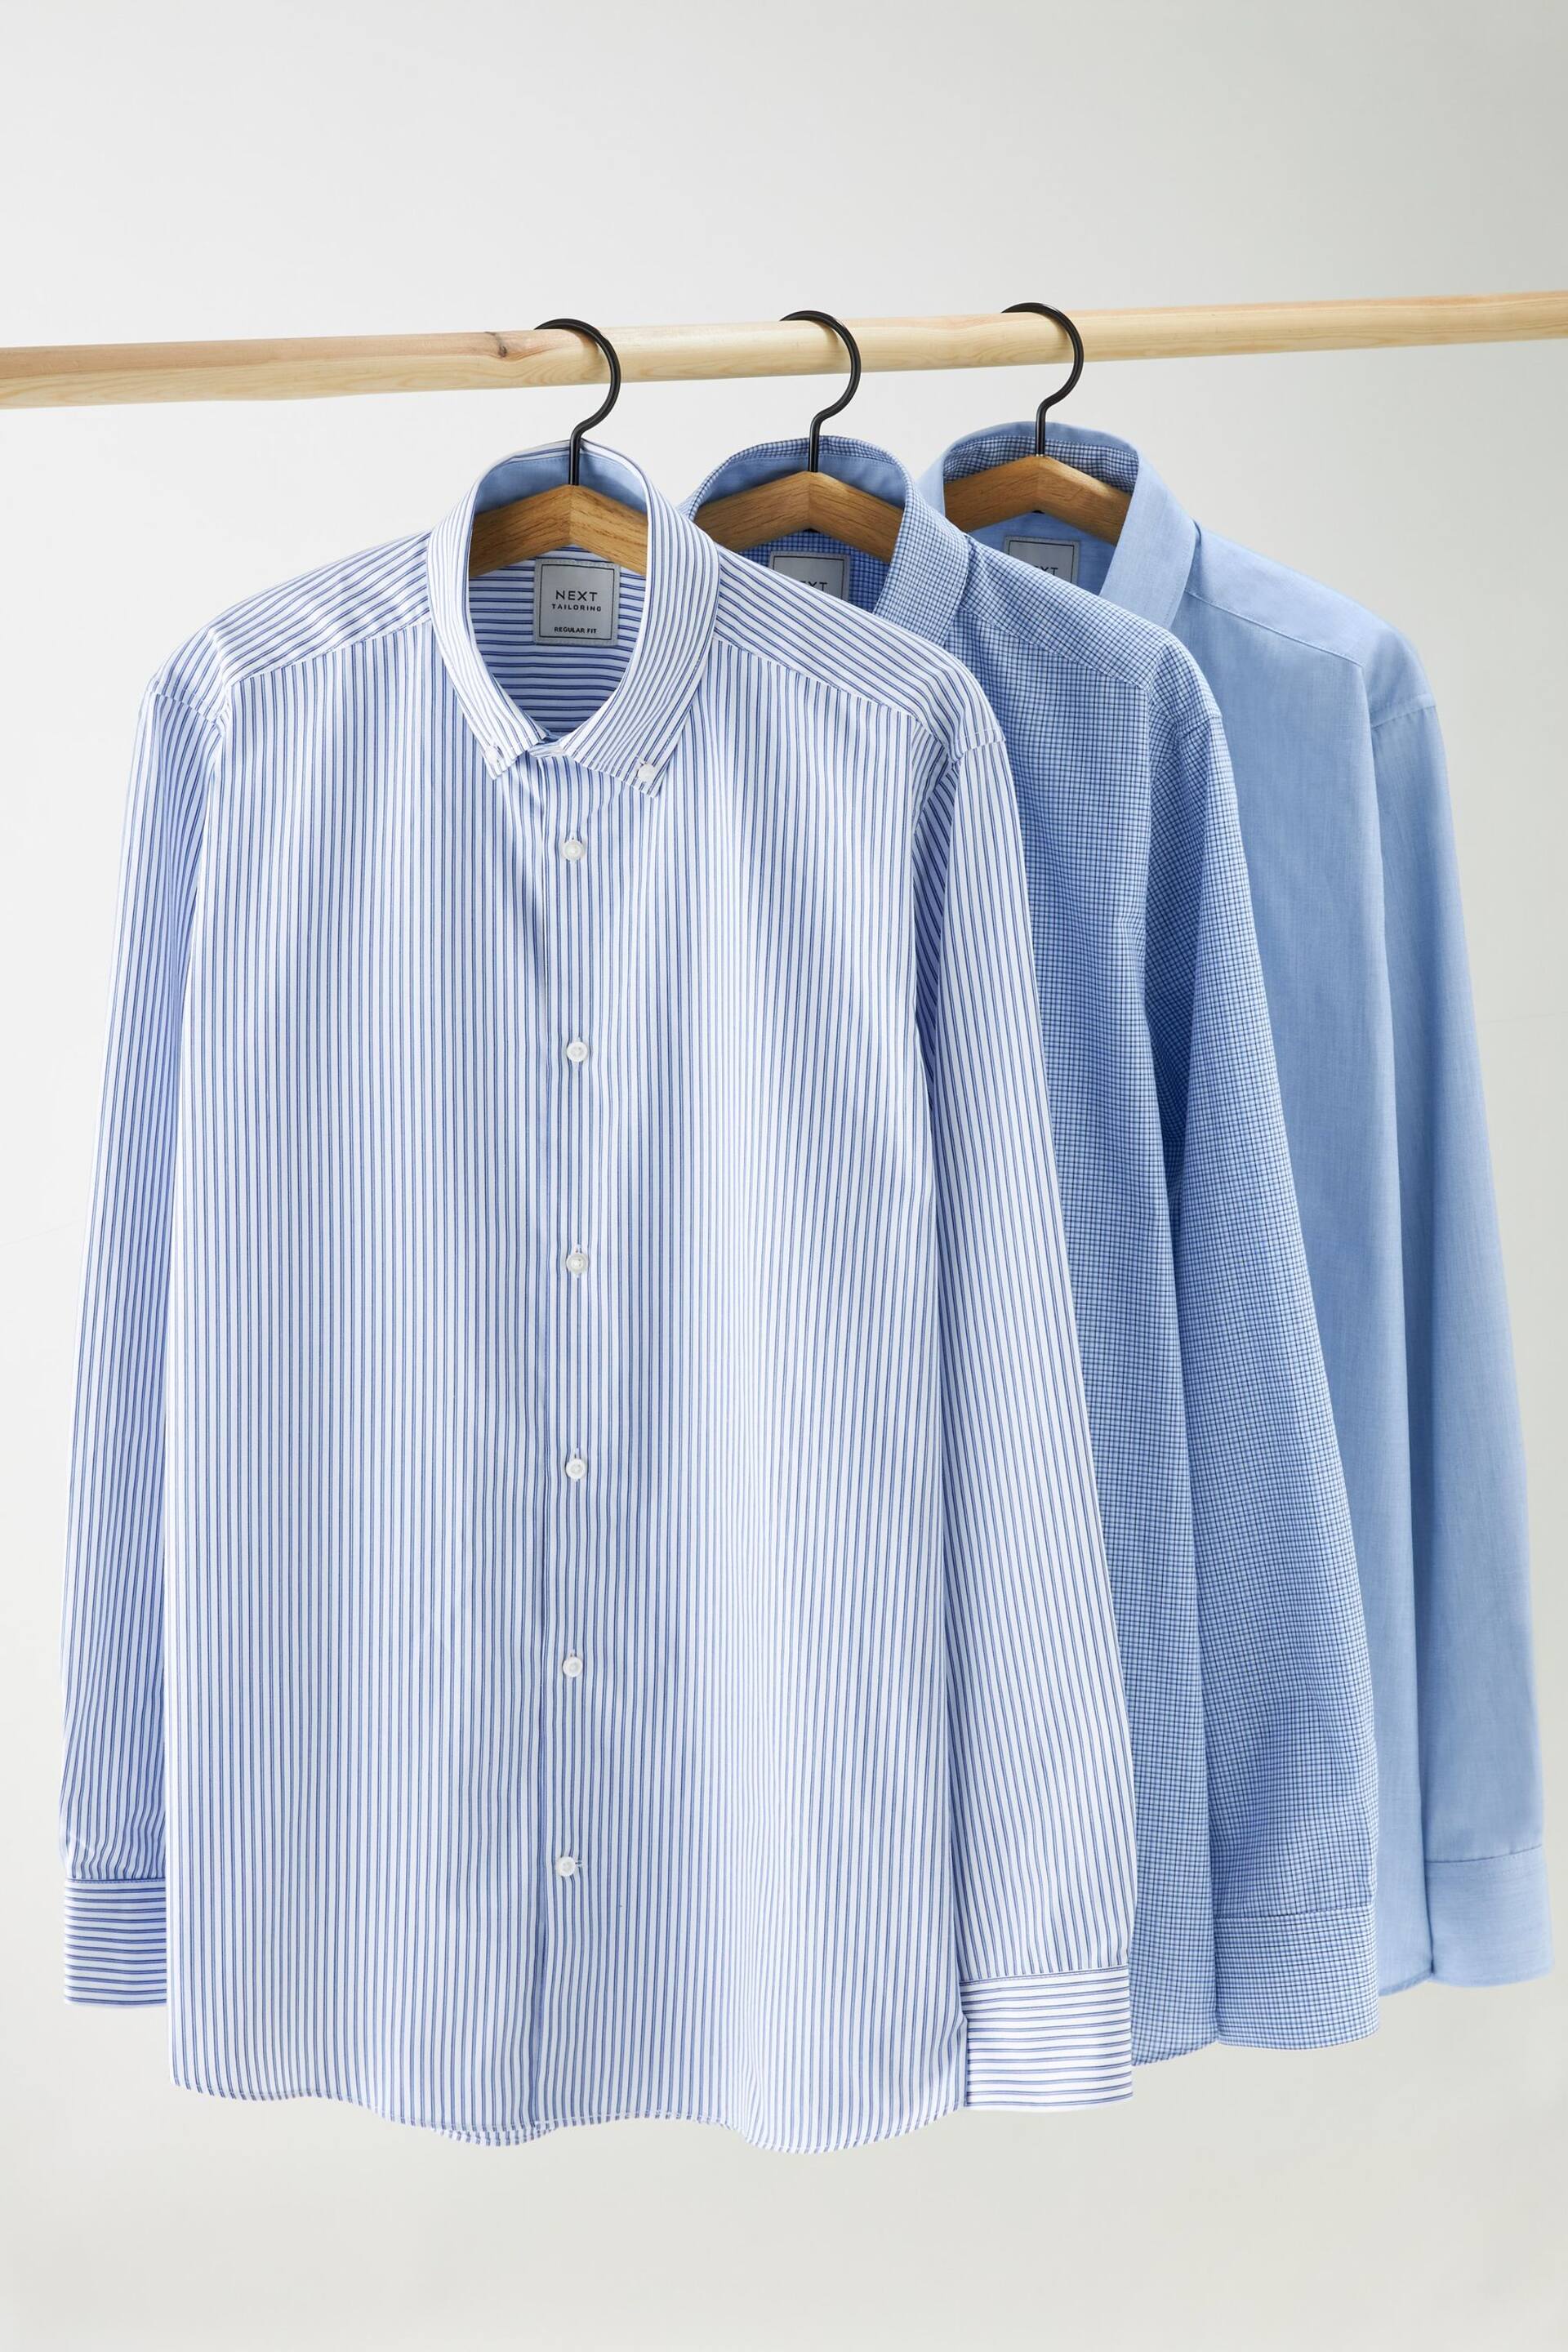 Blue Regular Fit Easy Care Single Cuff Shirts 3 Pack - Image 1 of 5